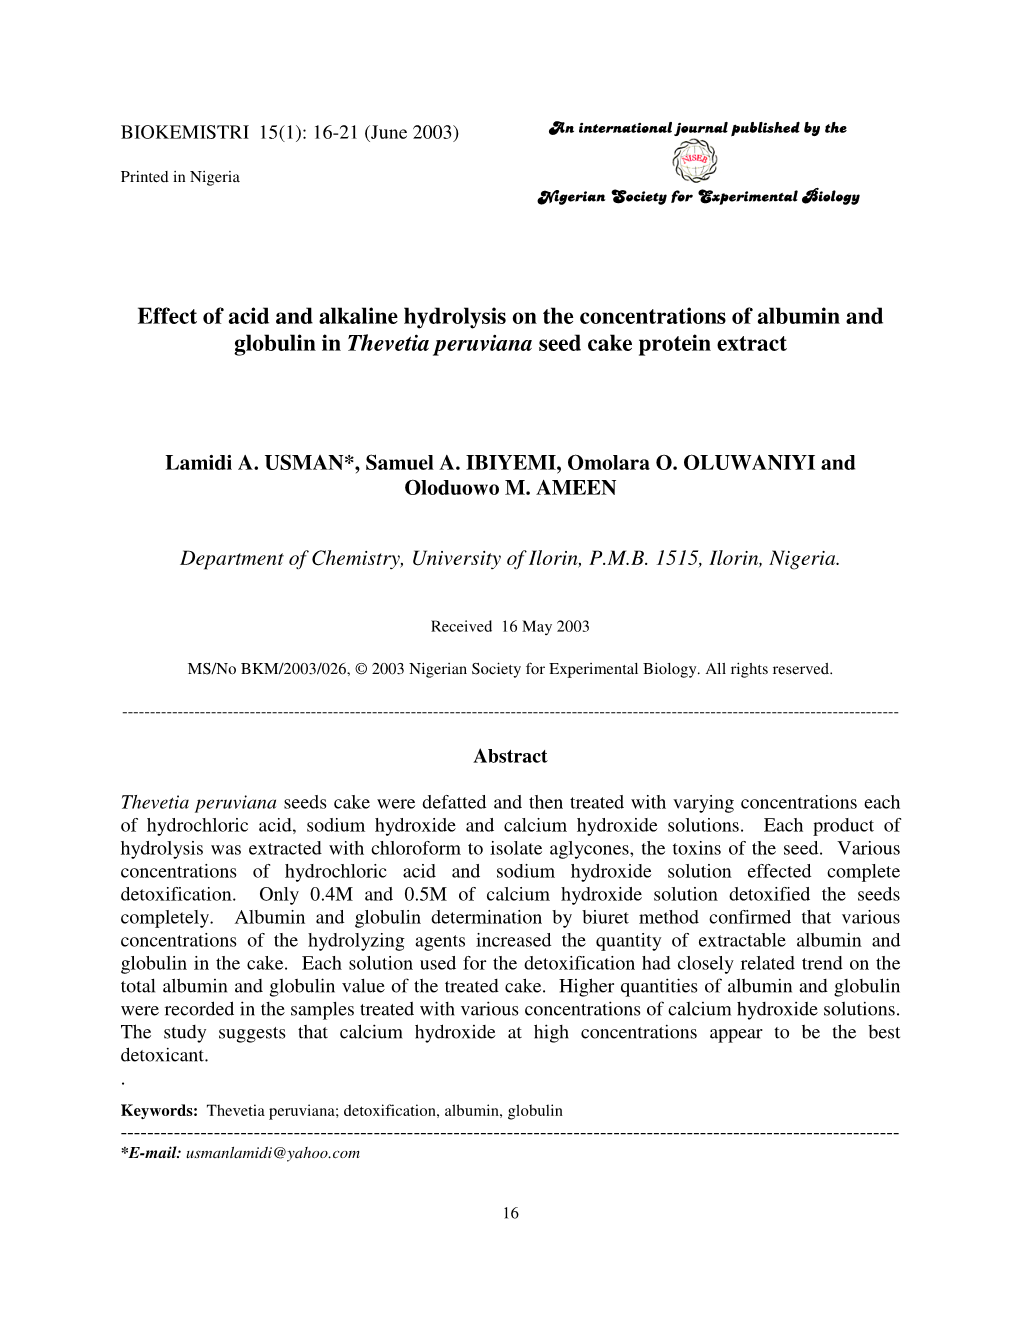 Effect of Acid and Alkaline Hydrolysis on the Concentrations of Albumin and Globulin in Thevetia Peruviana Seed Cake Protein Extract